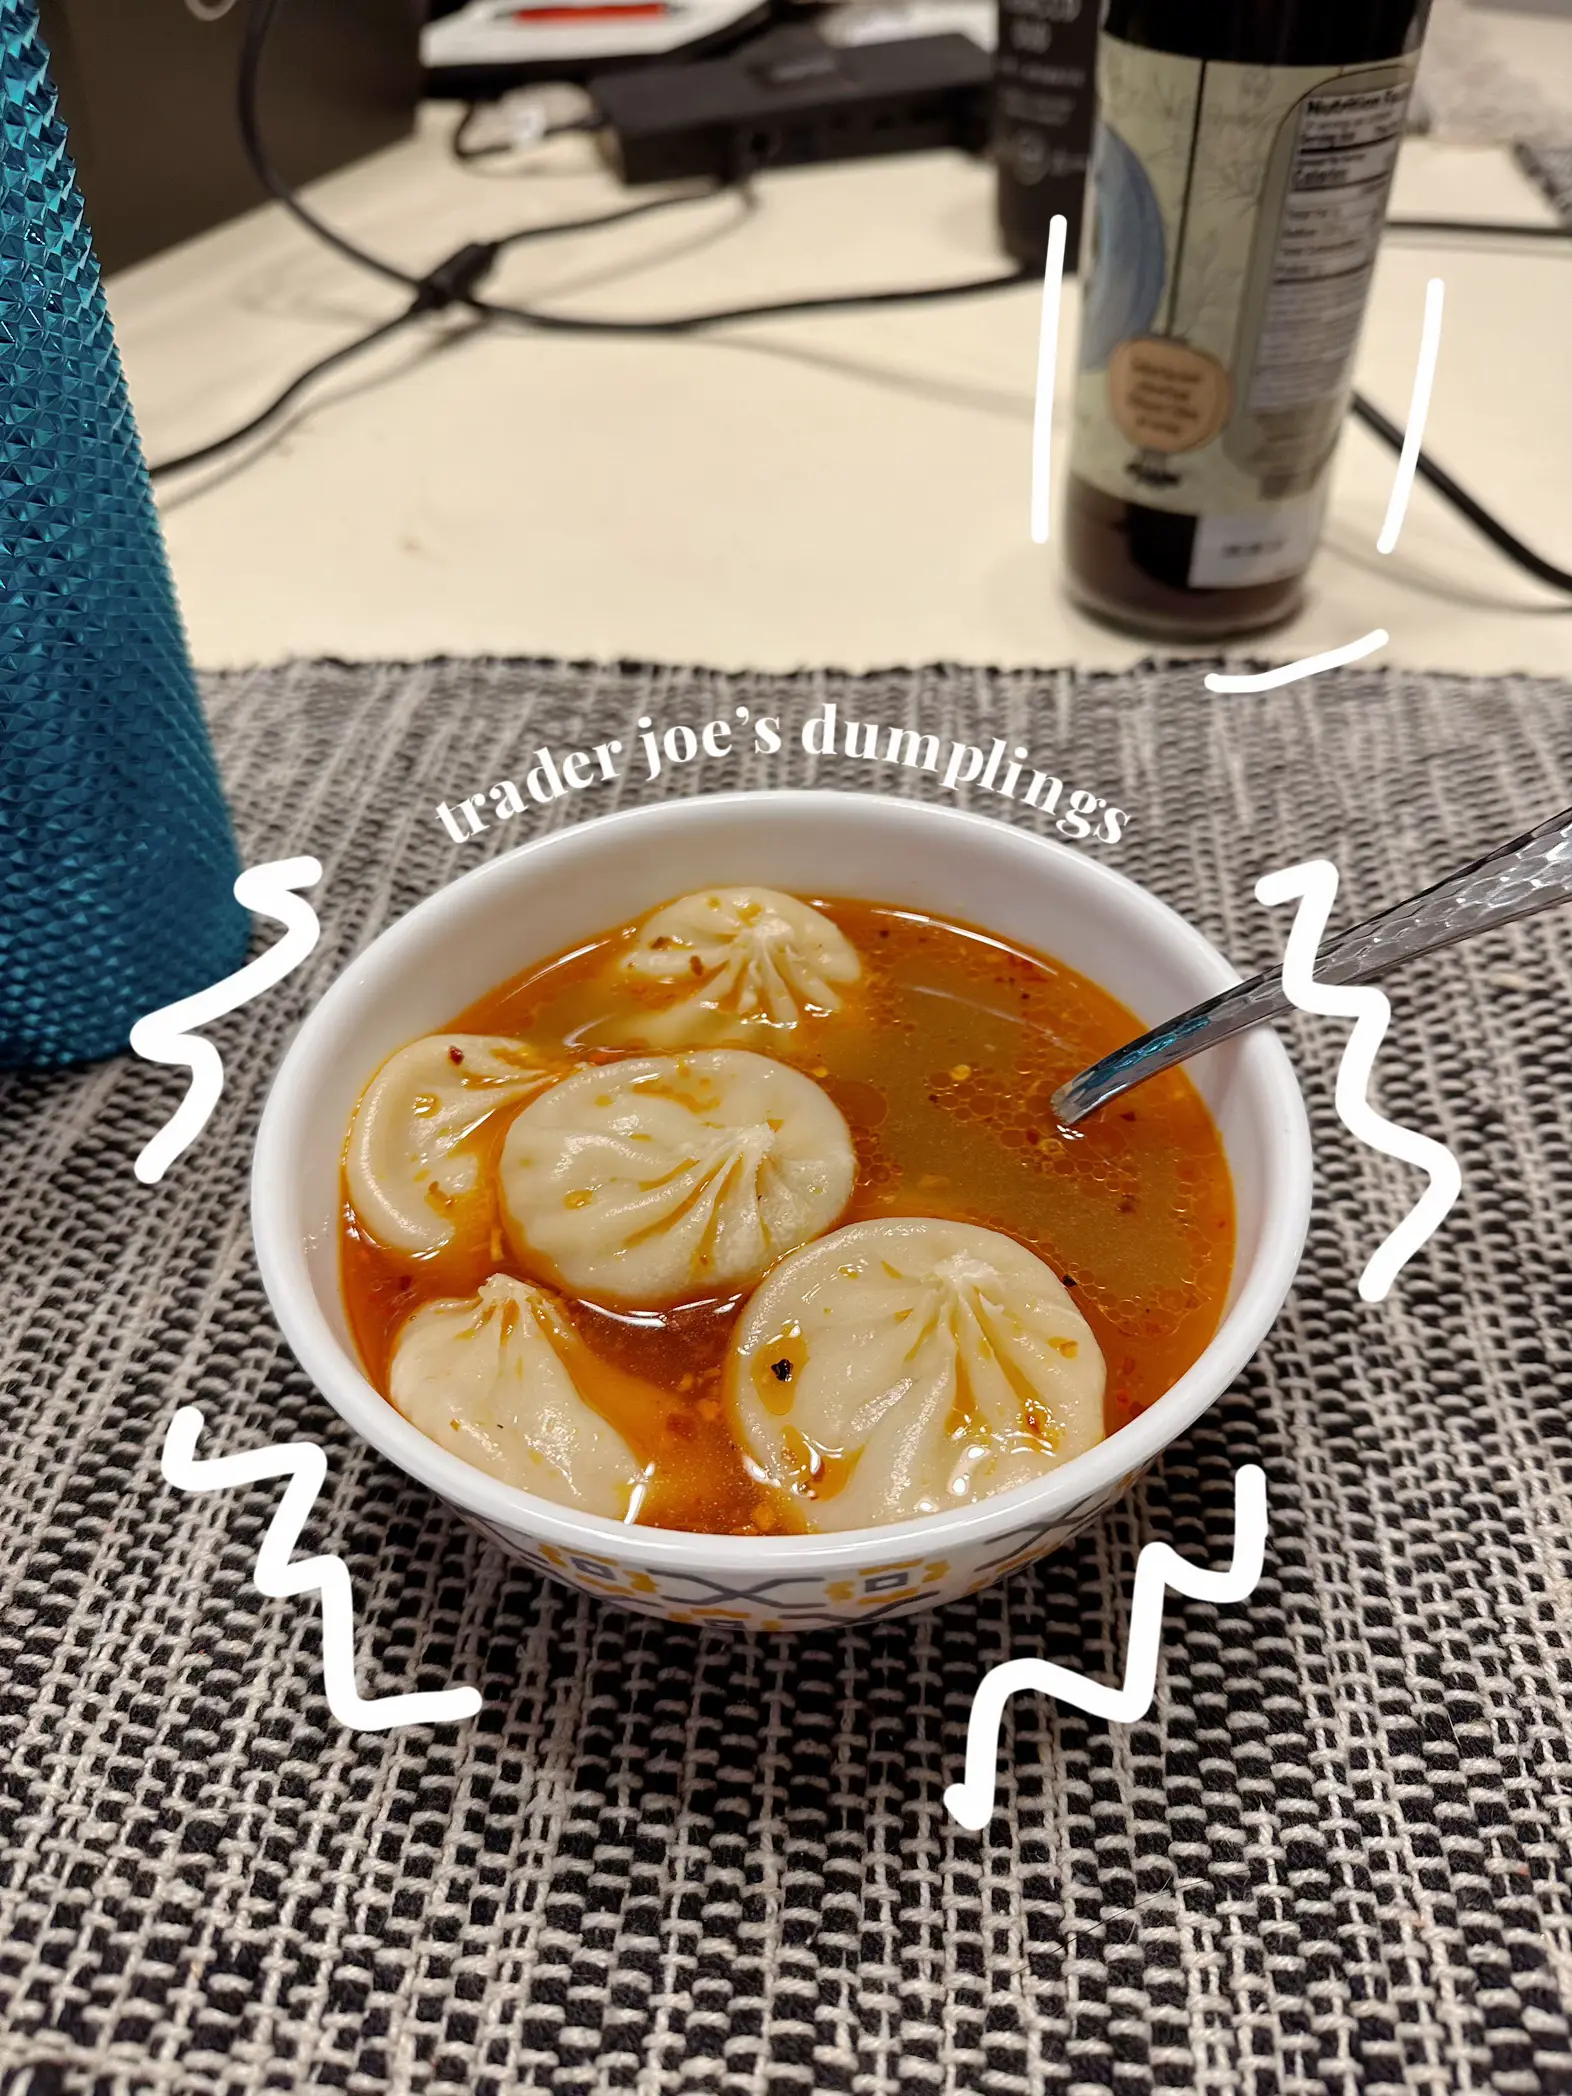 I COOKED DUMPLINGS MY PICKY BF LIKED 🥟, Gallery posted by A S H L E I G H